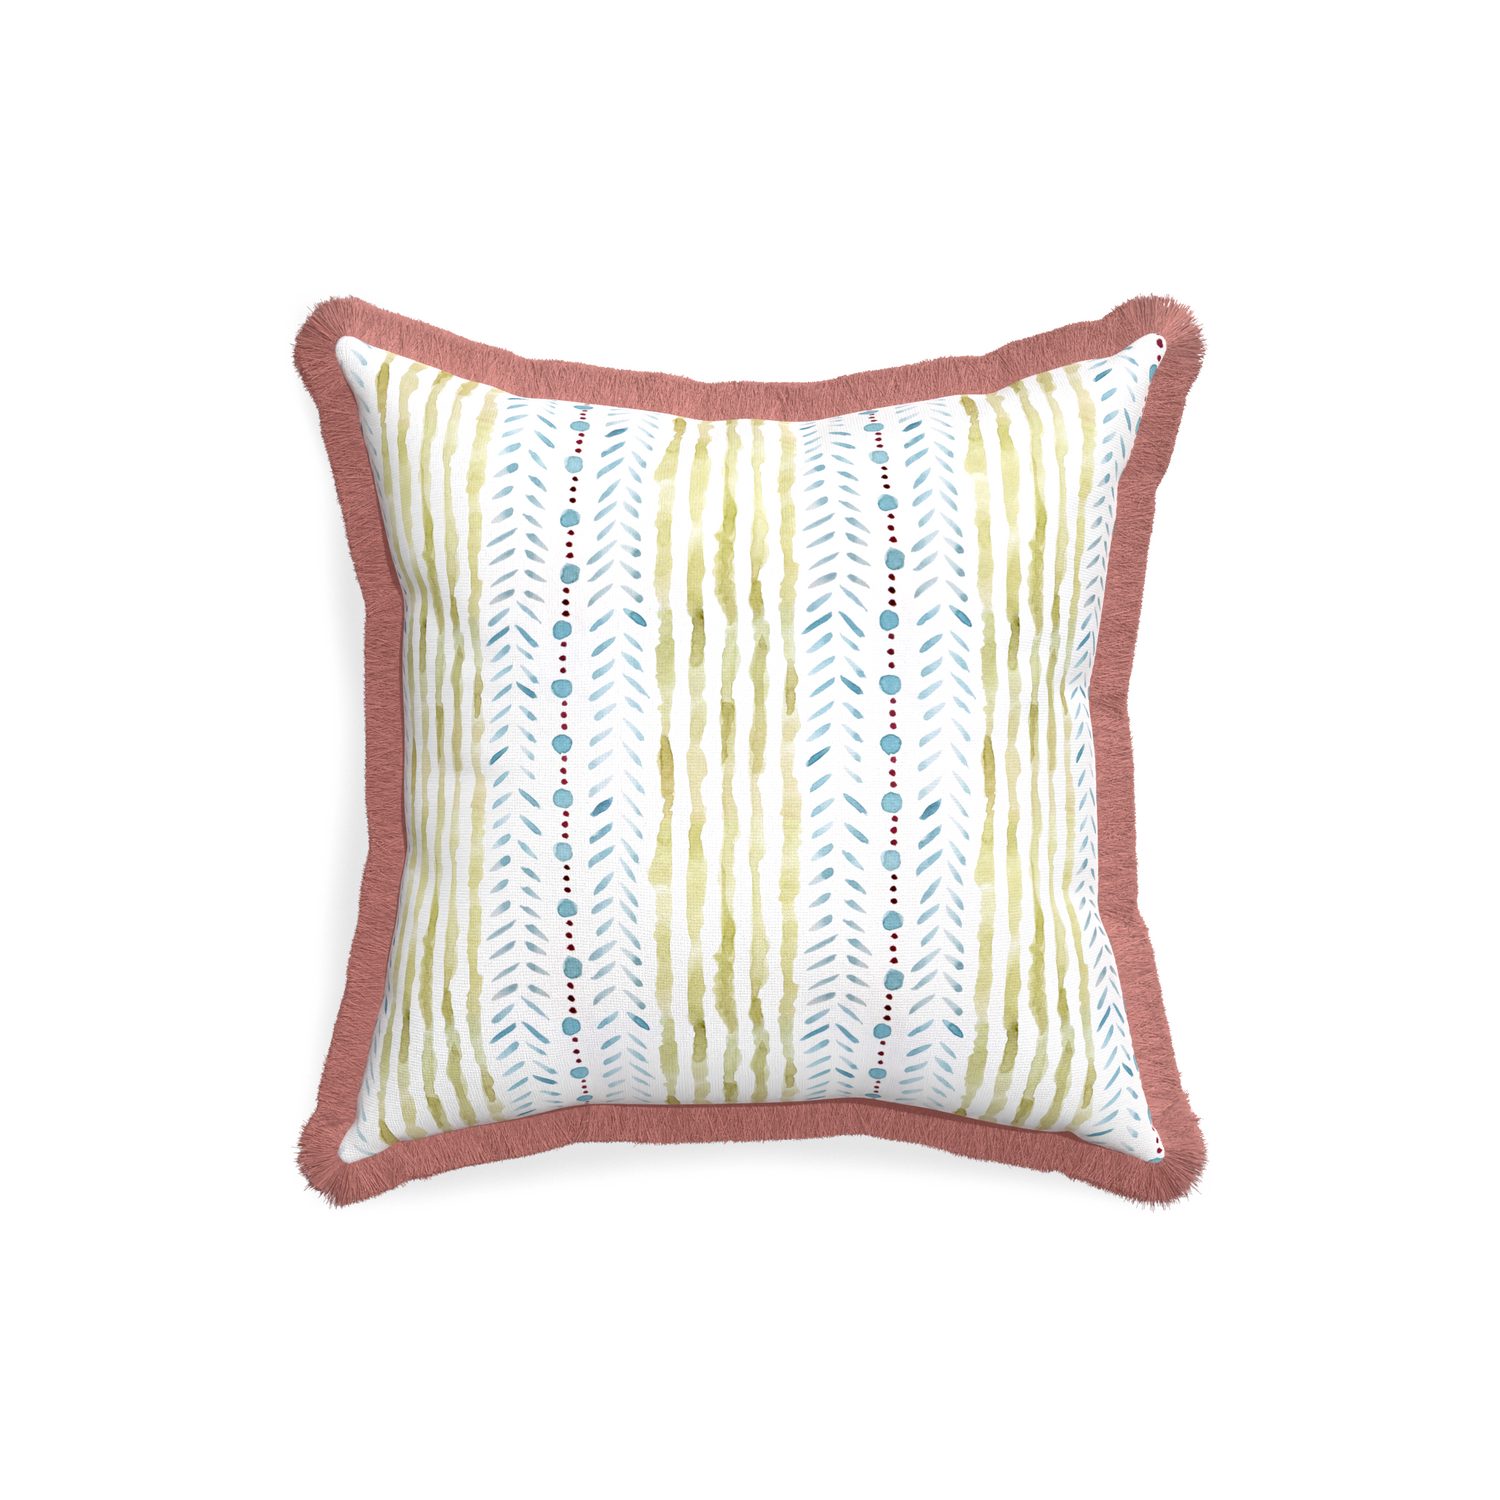 18-square julia custom blue & green stripedpillow with d fringe on white background